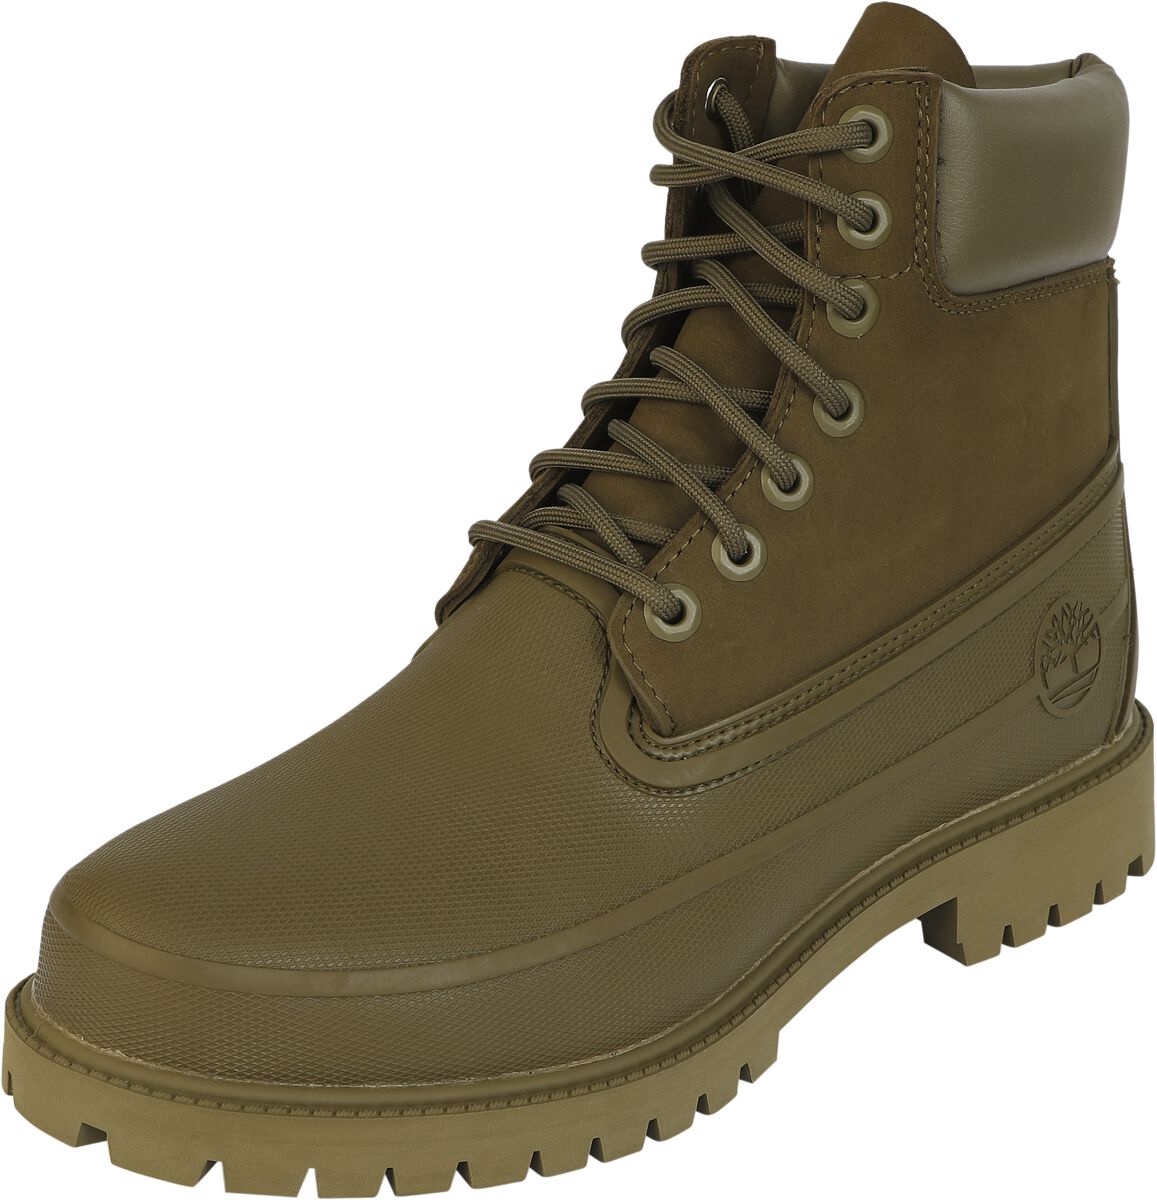 Timberland Rubber Toe 6 Inch Remix Boot oliv in EU43 von Timberland